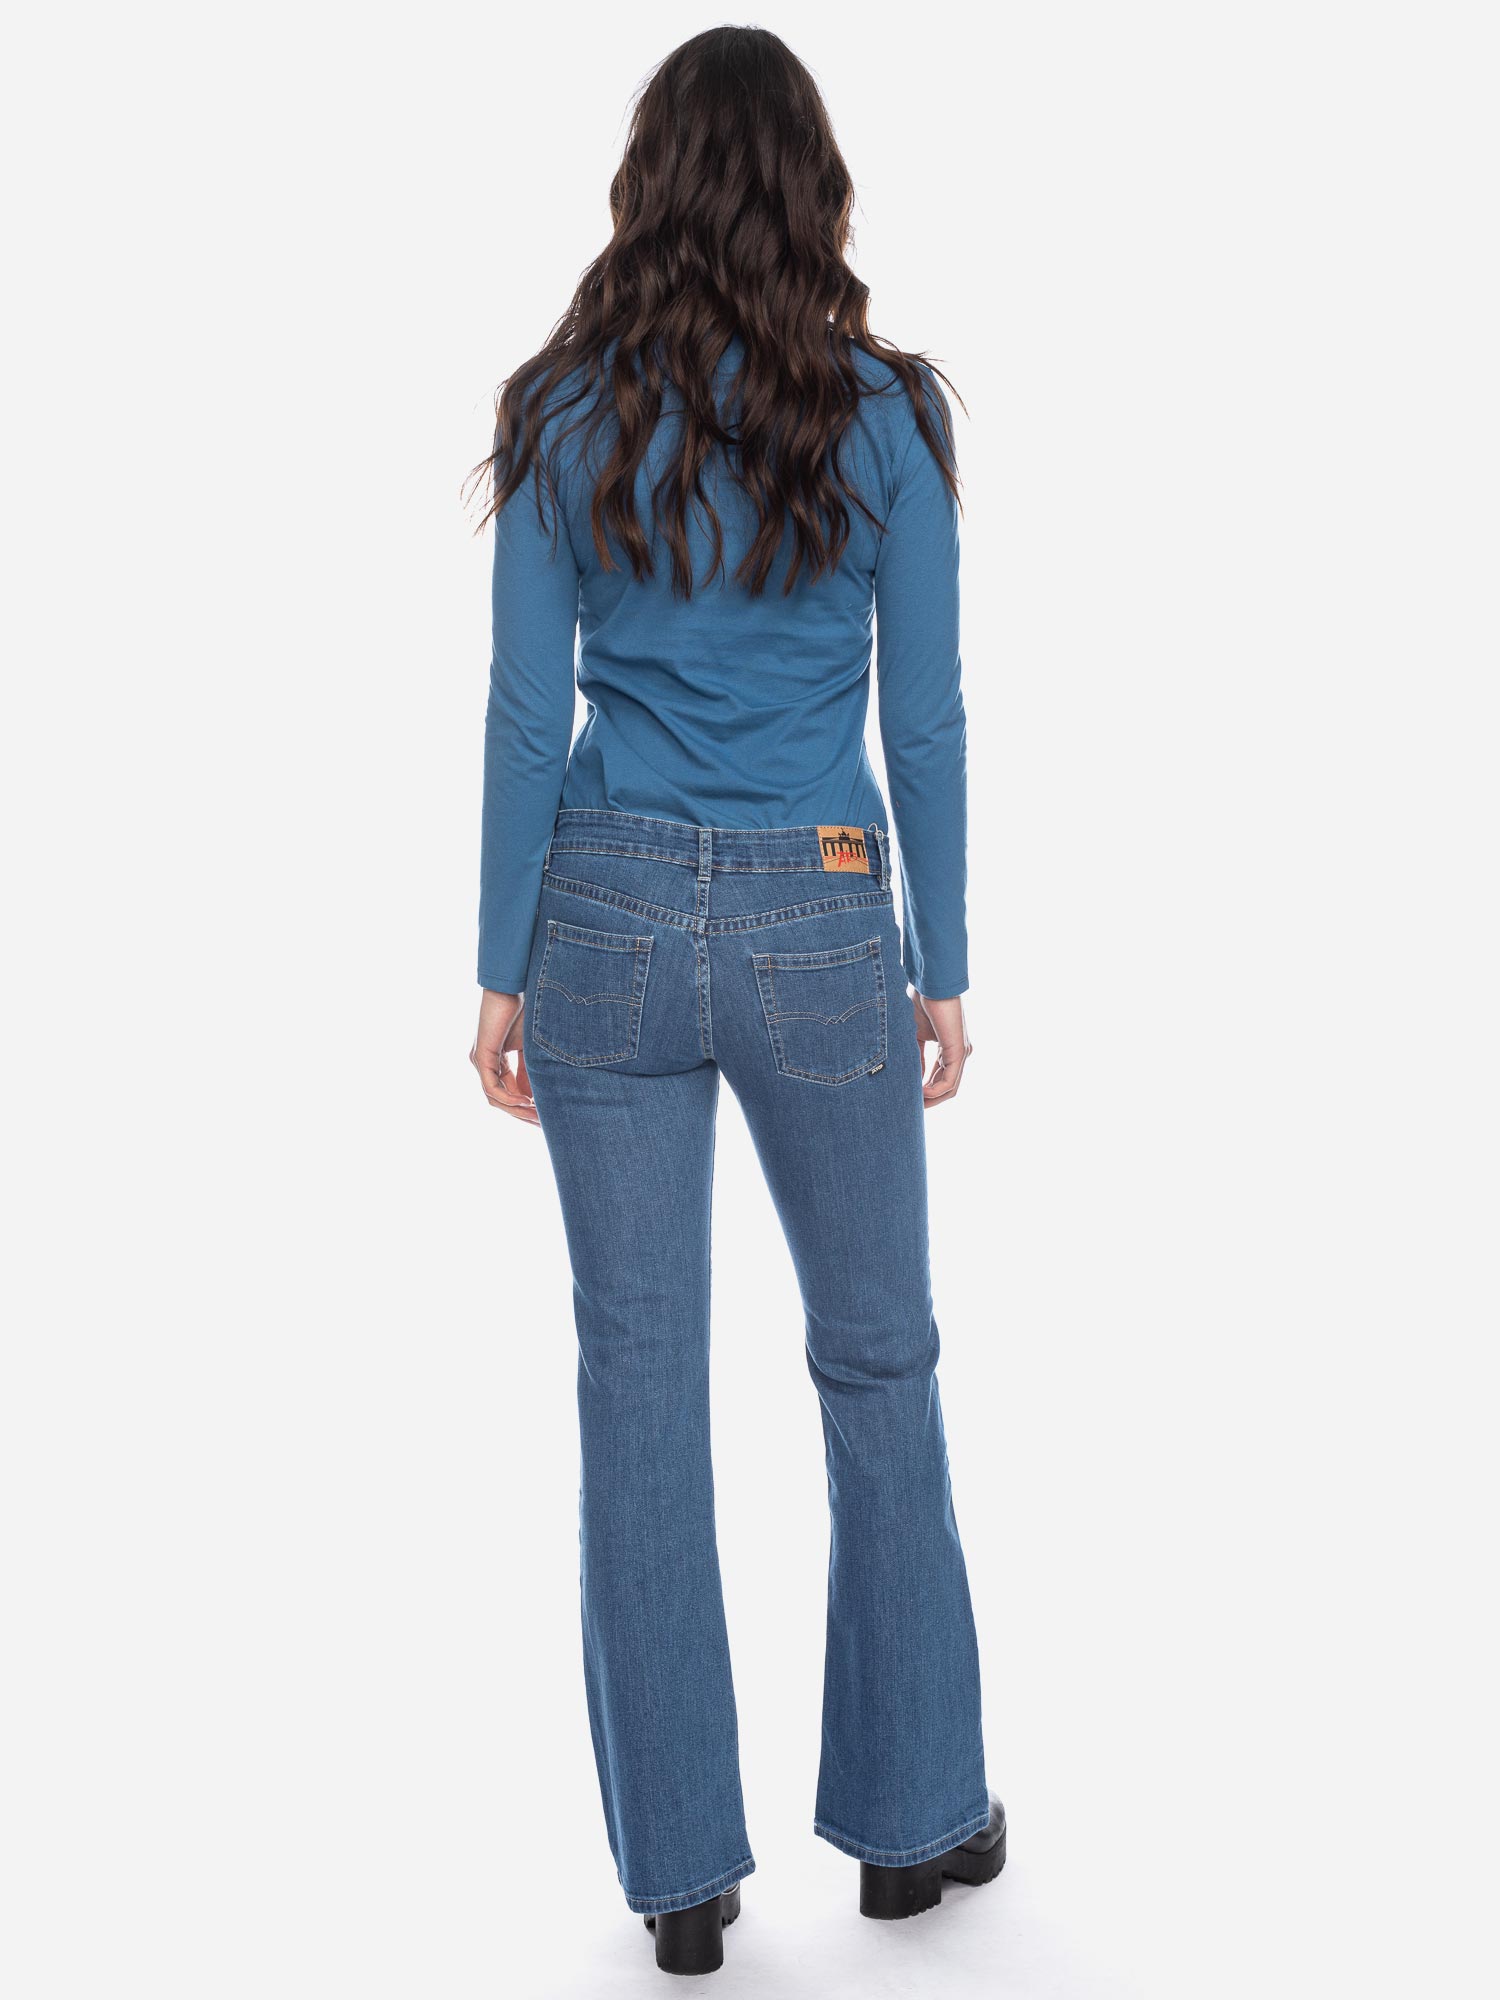 Jeans Fred GOTS RR2776 BL